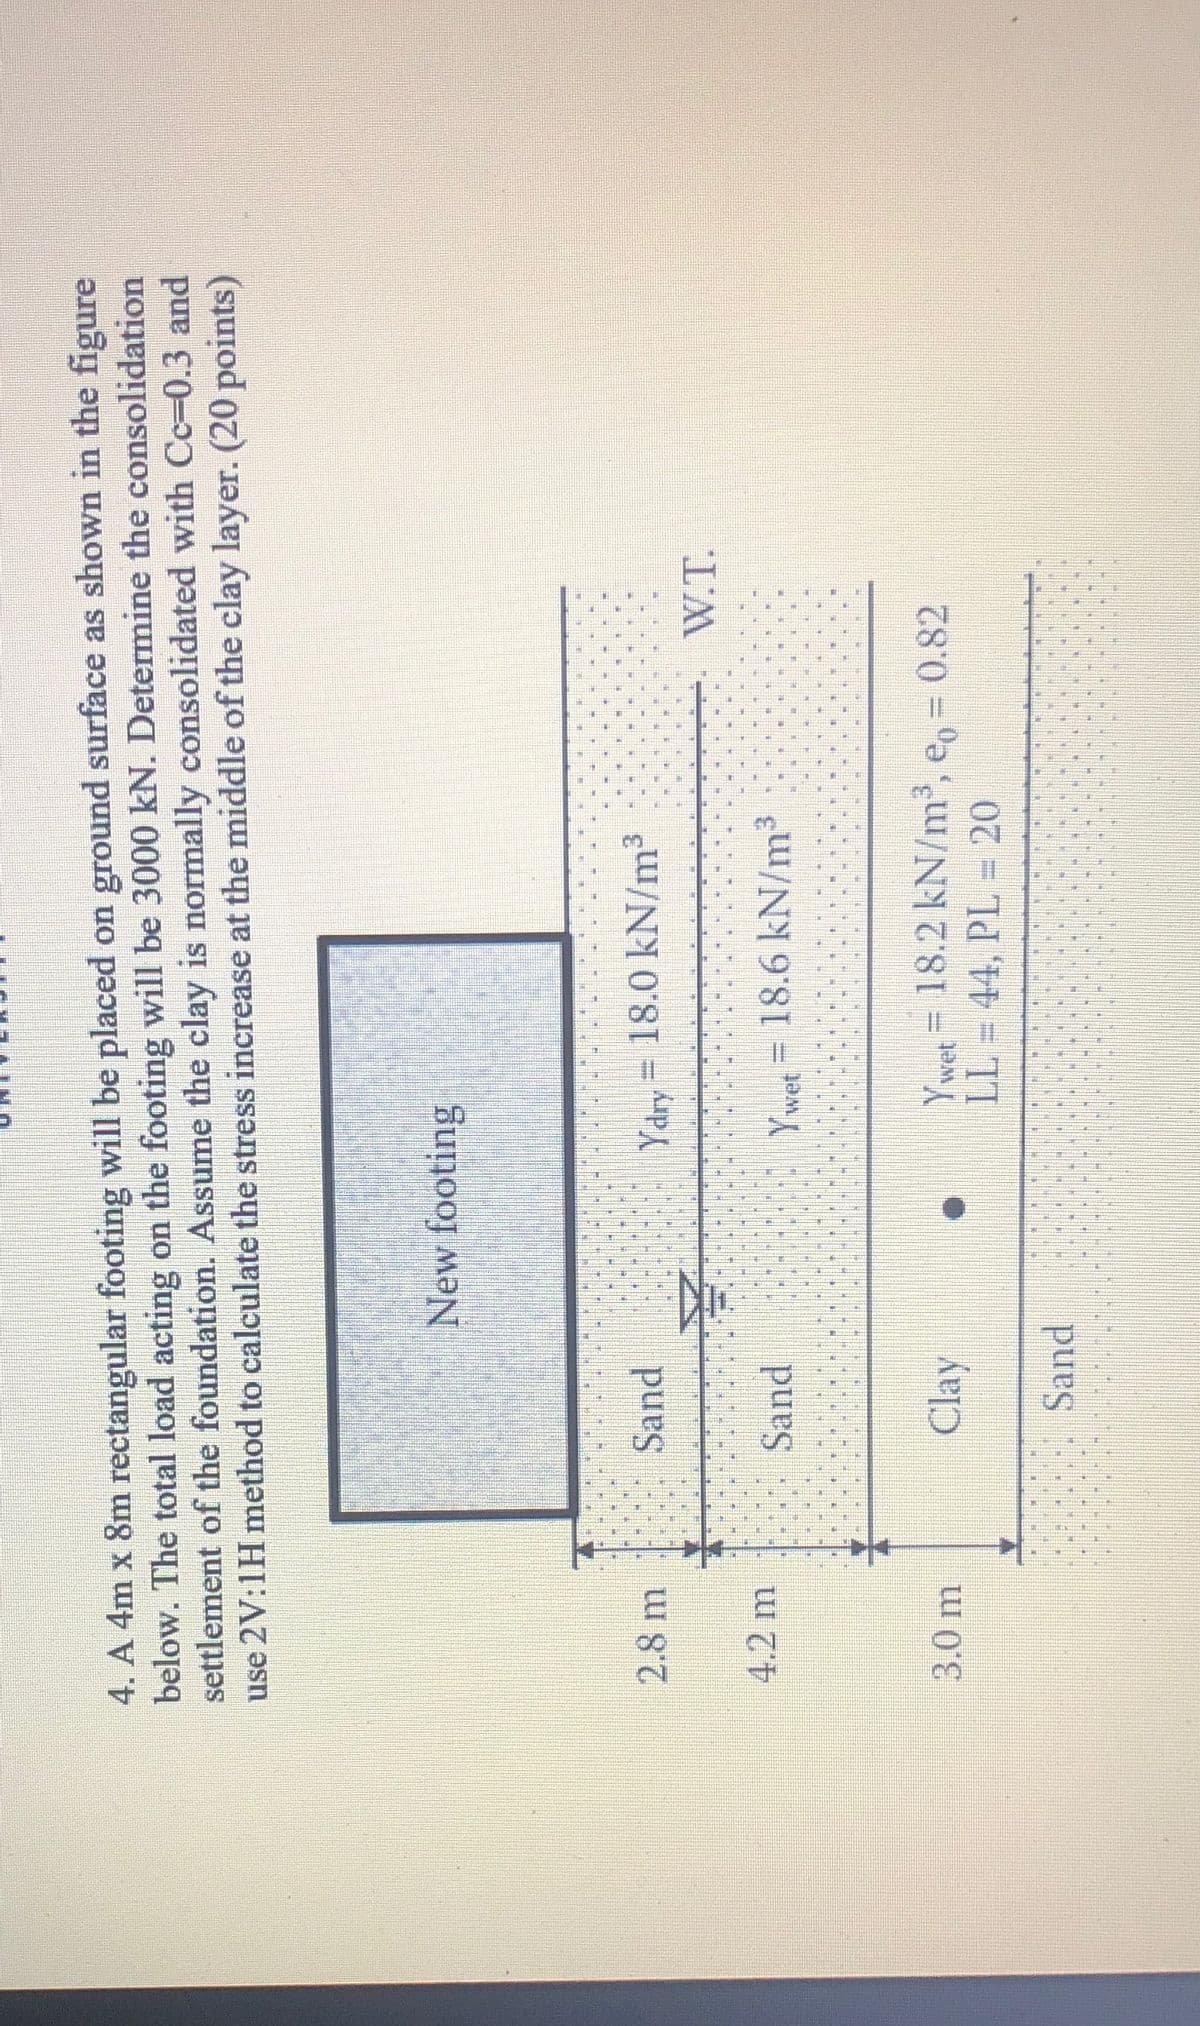 4. A 4m x 8m rectangular footing will be placed on ground surface as shown in the figure
below. The total load acting on the footing will be 3000 kN. Determine the consolidation
settlement of the foundation. Assume the clay is normally consolidated with Cc-0.3 and
use 2V:1H method to calculate the stress increase at the middle of the clay layer. (20 points)
New footing
2.8 m
Sand
Ydry = 18.0 kN/m³
4.2 m
Sand
Ywet = 18.6 kN/m³
Clay
Y wer = 18.2 kN/m', e, = 0.82
LL 44, PL = 20
3.0m
%3D
Sand
